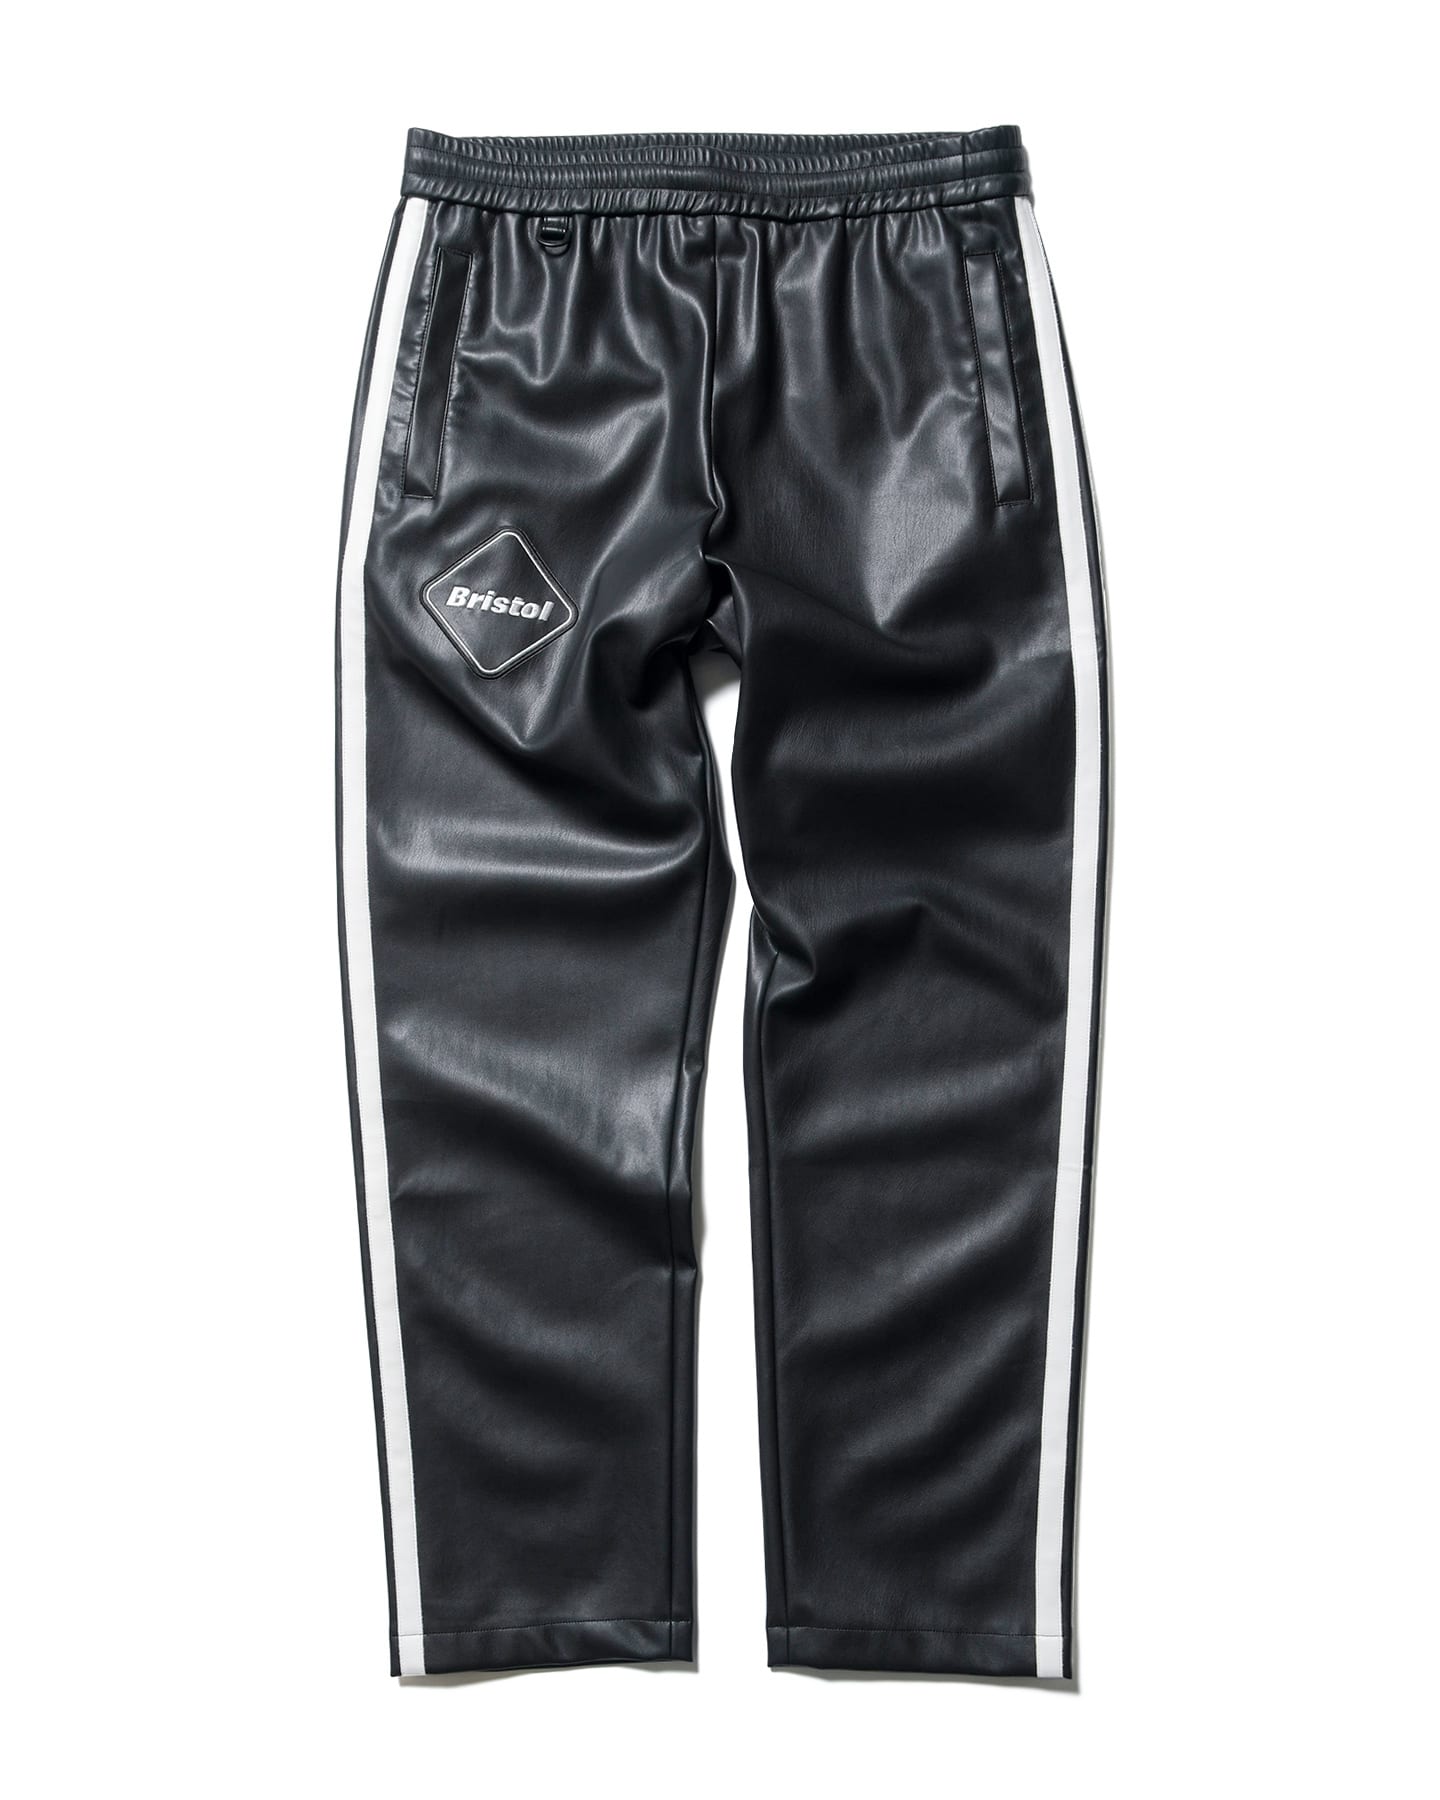 SOPH. | SYNTHETIC LEATHER PANTS(S BLACK):